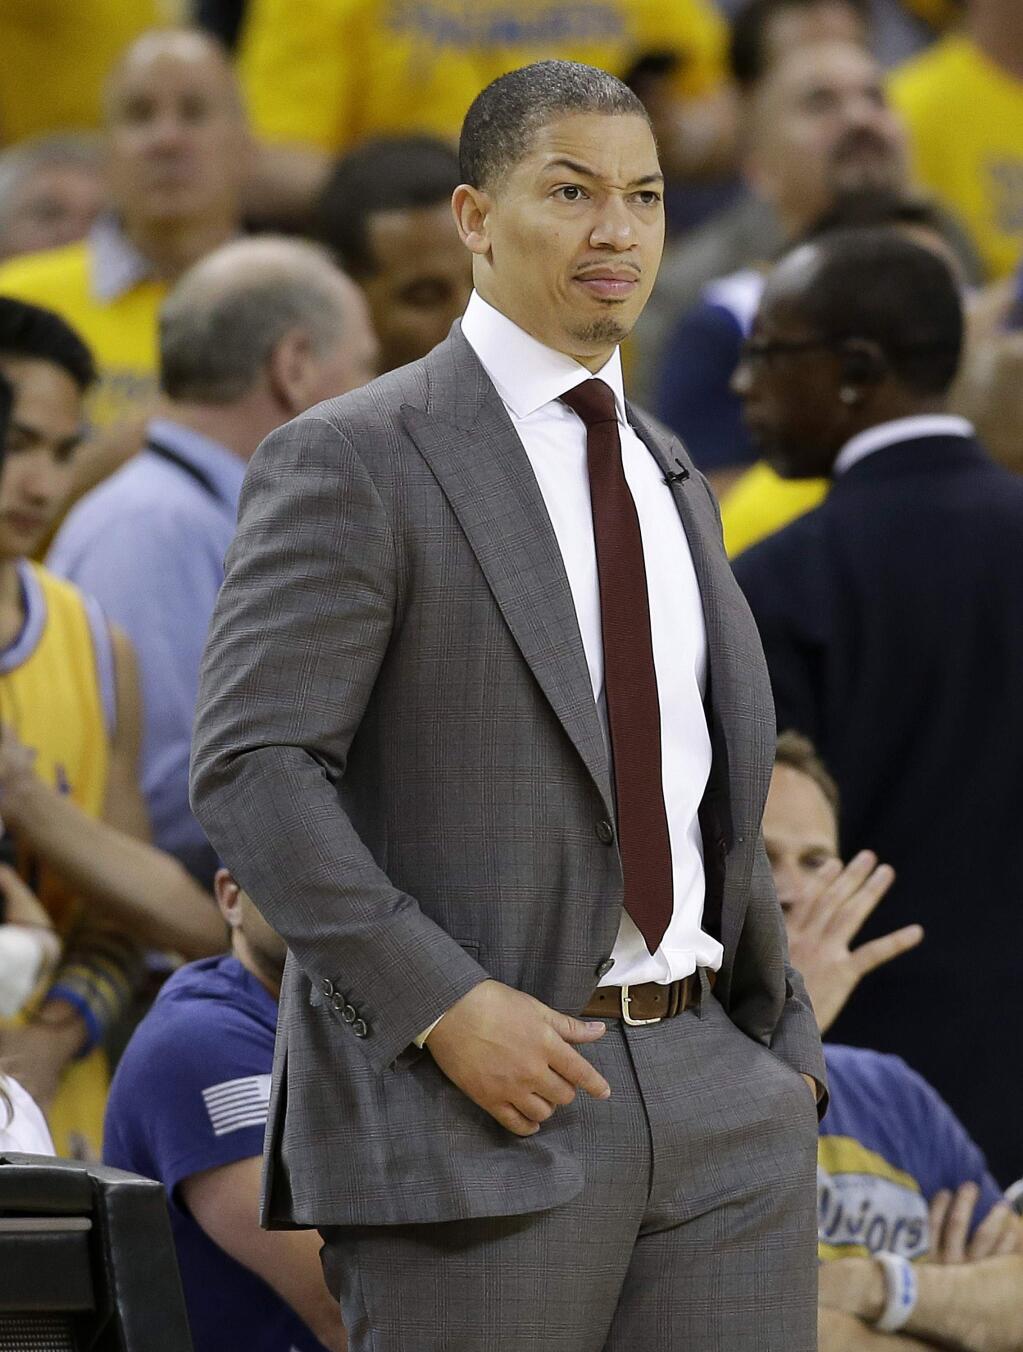 Cleveland Cavaliers head coach Tyronn Lue watches during the second half of Game 1 of basketballs NBA Finals between the Golden State Warriors and the Cavaliers in Oakland, Calif., Thursday, June 2, 2016. (AP Photo/Marcio Jose Sanchez)